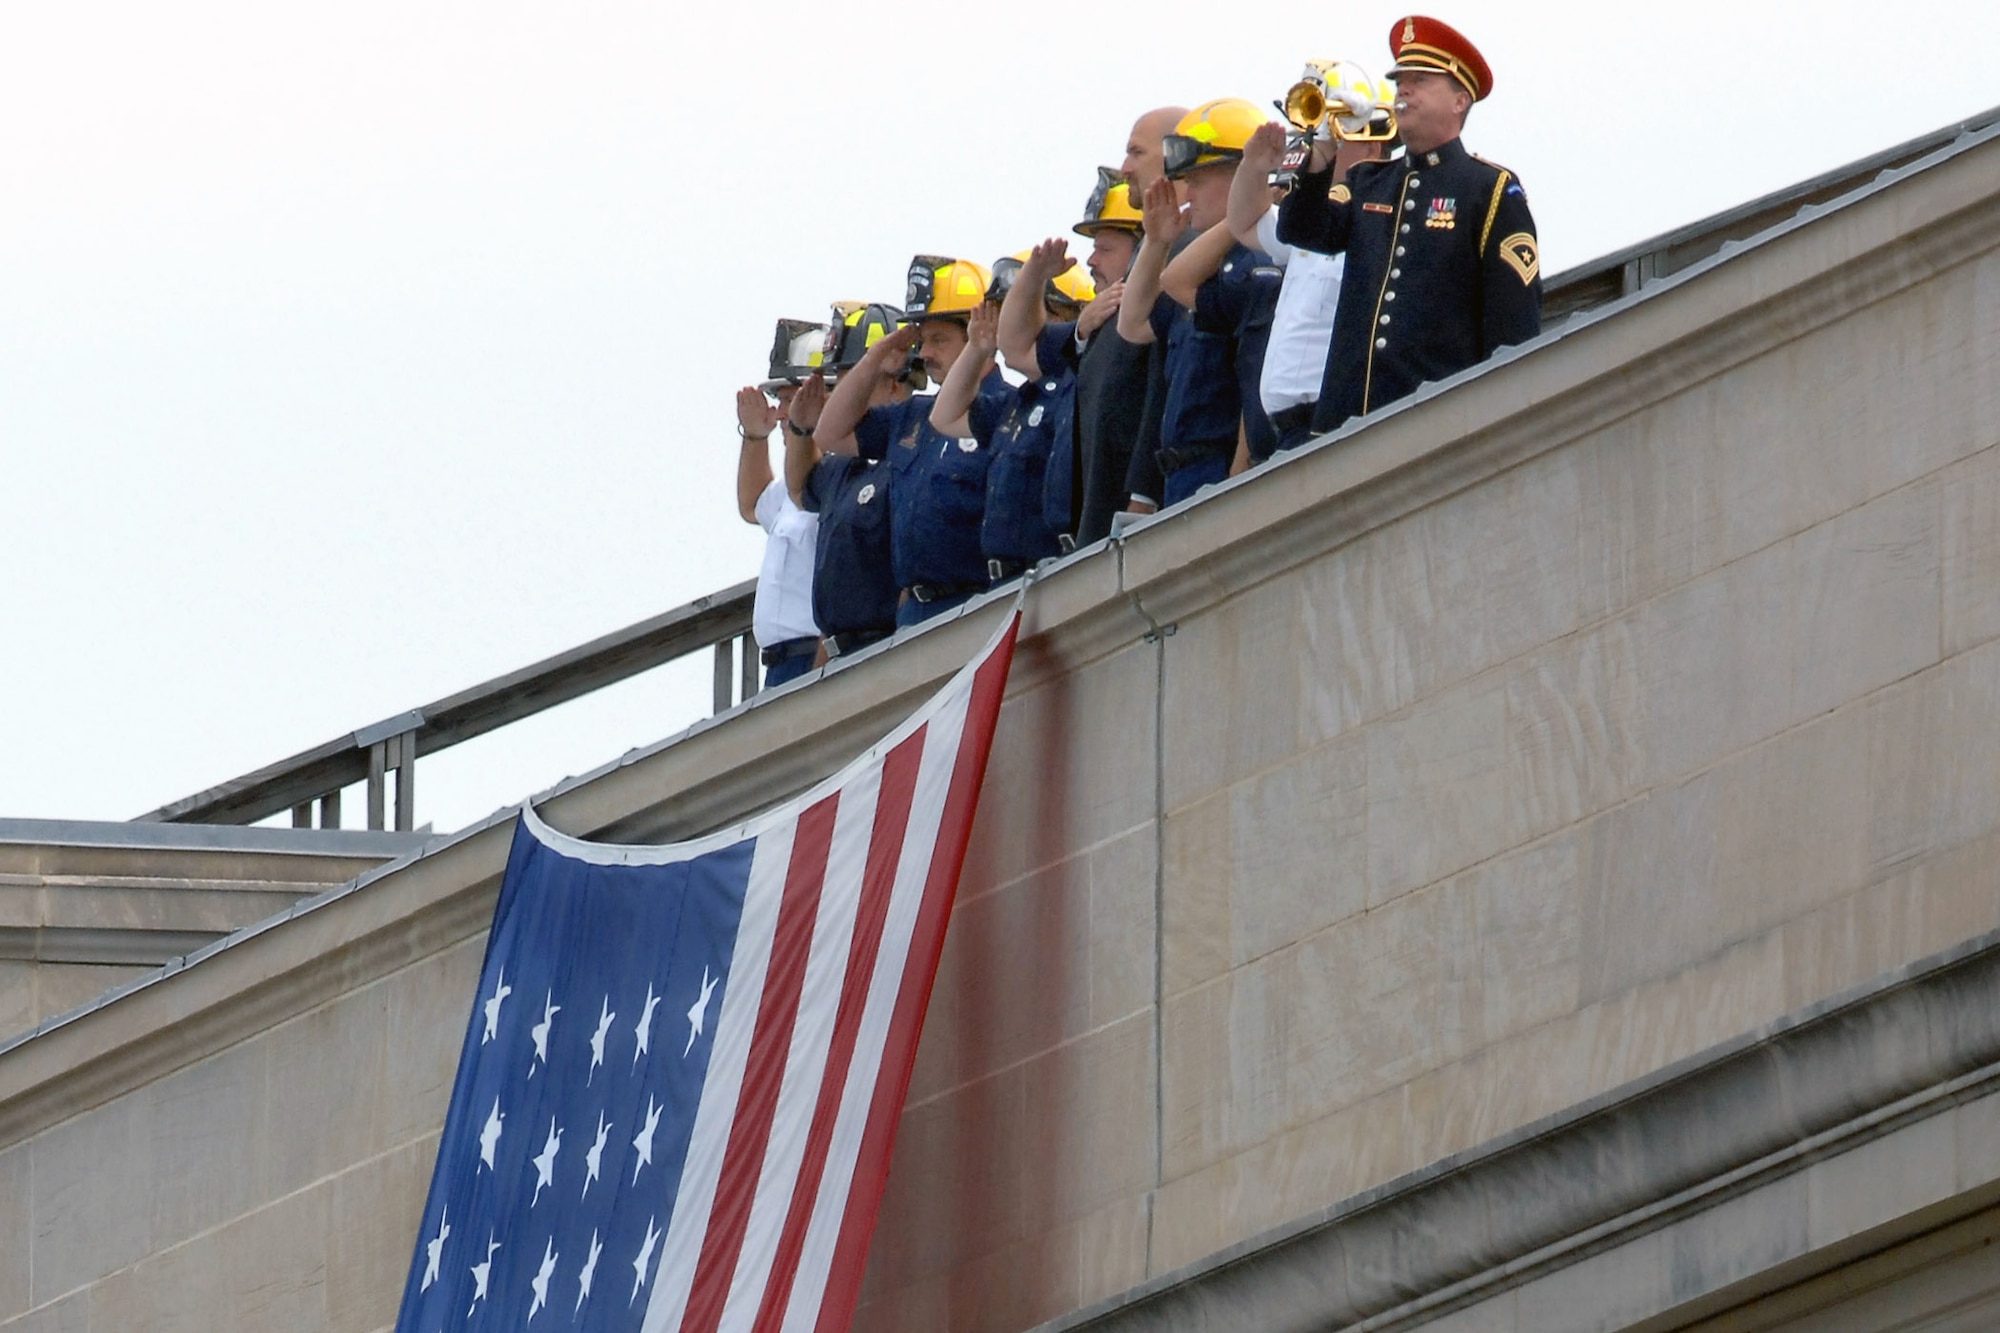 First responders stand atop the Pentagon during the Pentagon Memorial dedication ceremony Sept. 11 at Alexandria, Va. They stood at the spot where American Airlines Flight 77 crashed into the building on Sept. 11, 2001, killing 59 people aboard the flight and 125 in the building. First responders are the firefighters, police officers and other rescue workers who were first on the scene that day. (Defense Department photo/Andy Morataya)